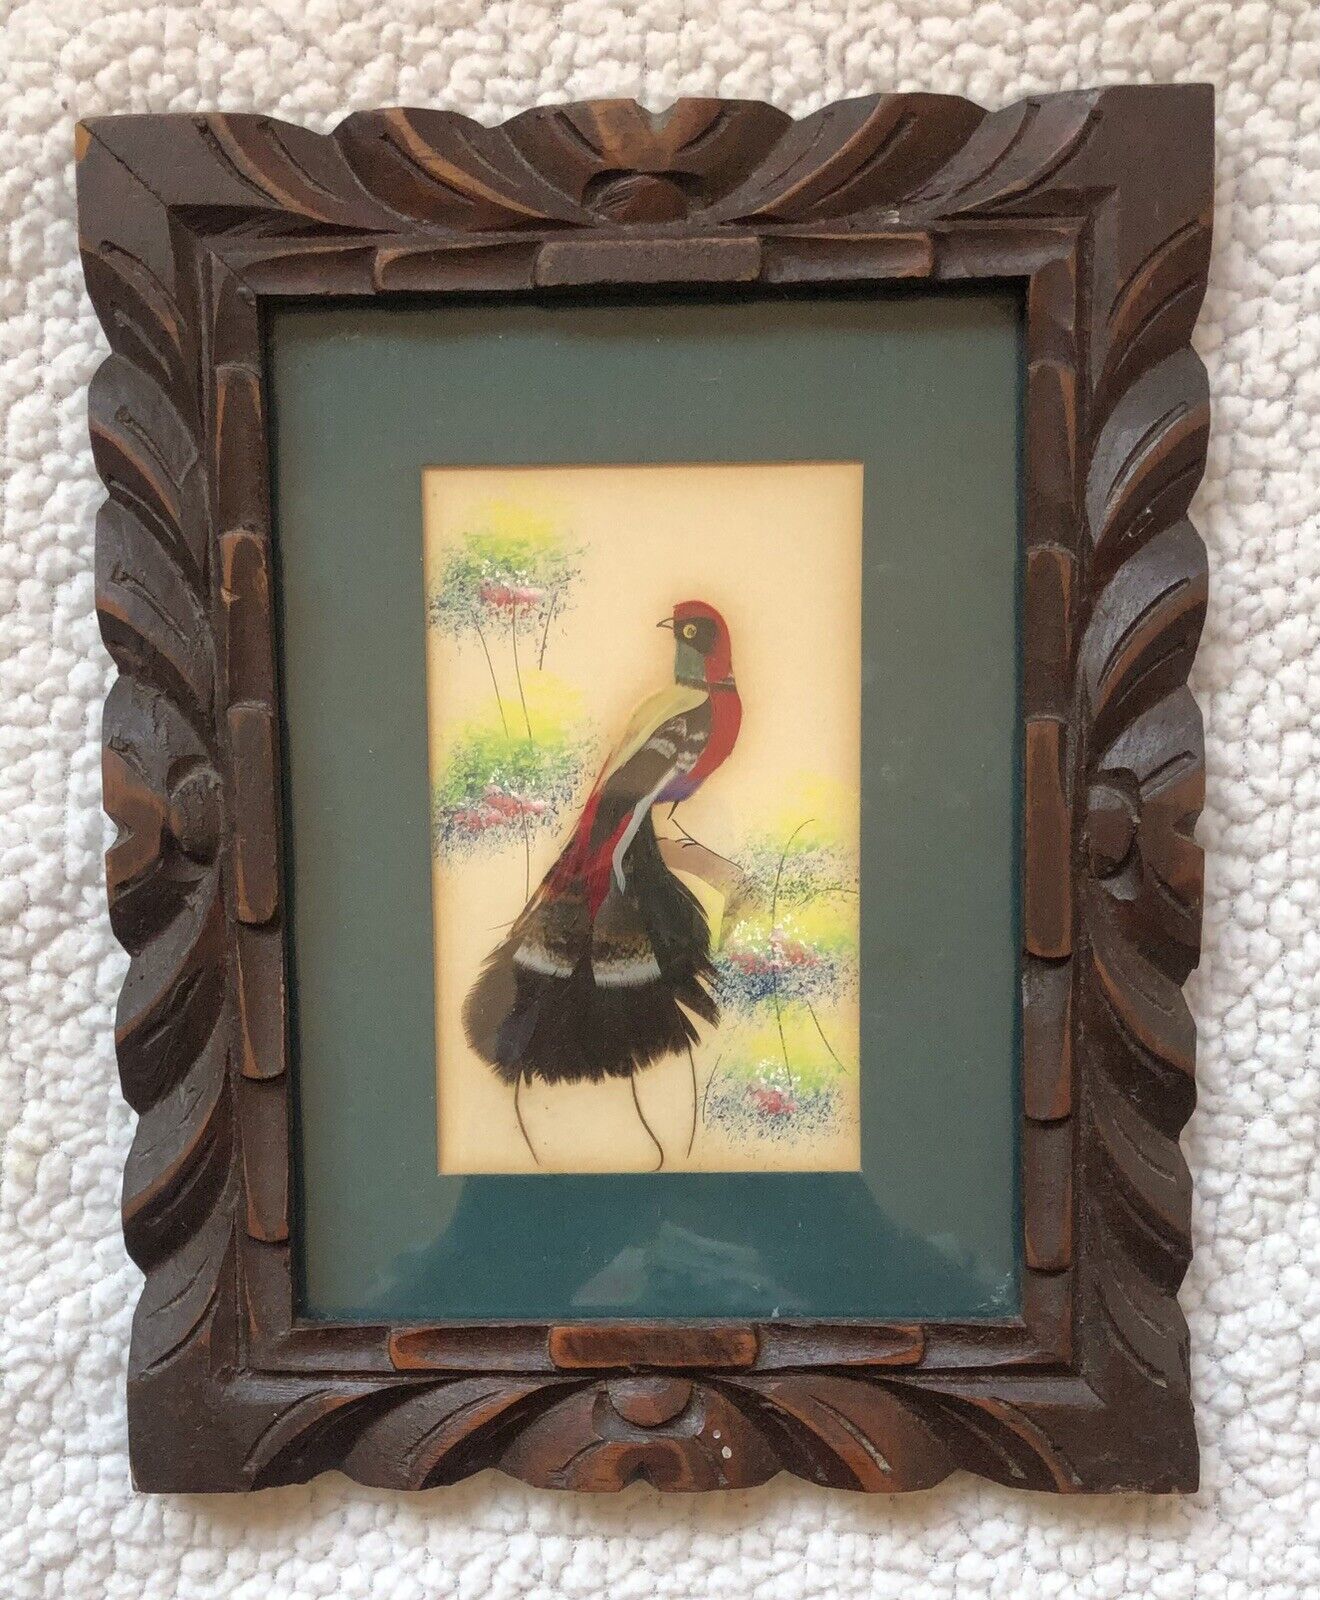 1950s Mexican Feathercraft Folk Art Bird in Hand Carved Wood Frame w/ Watercolor